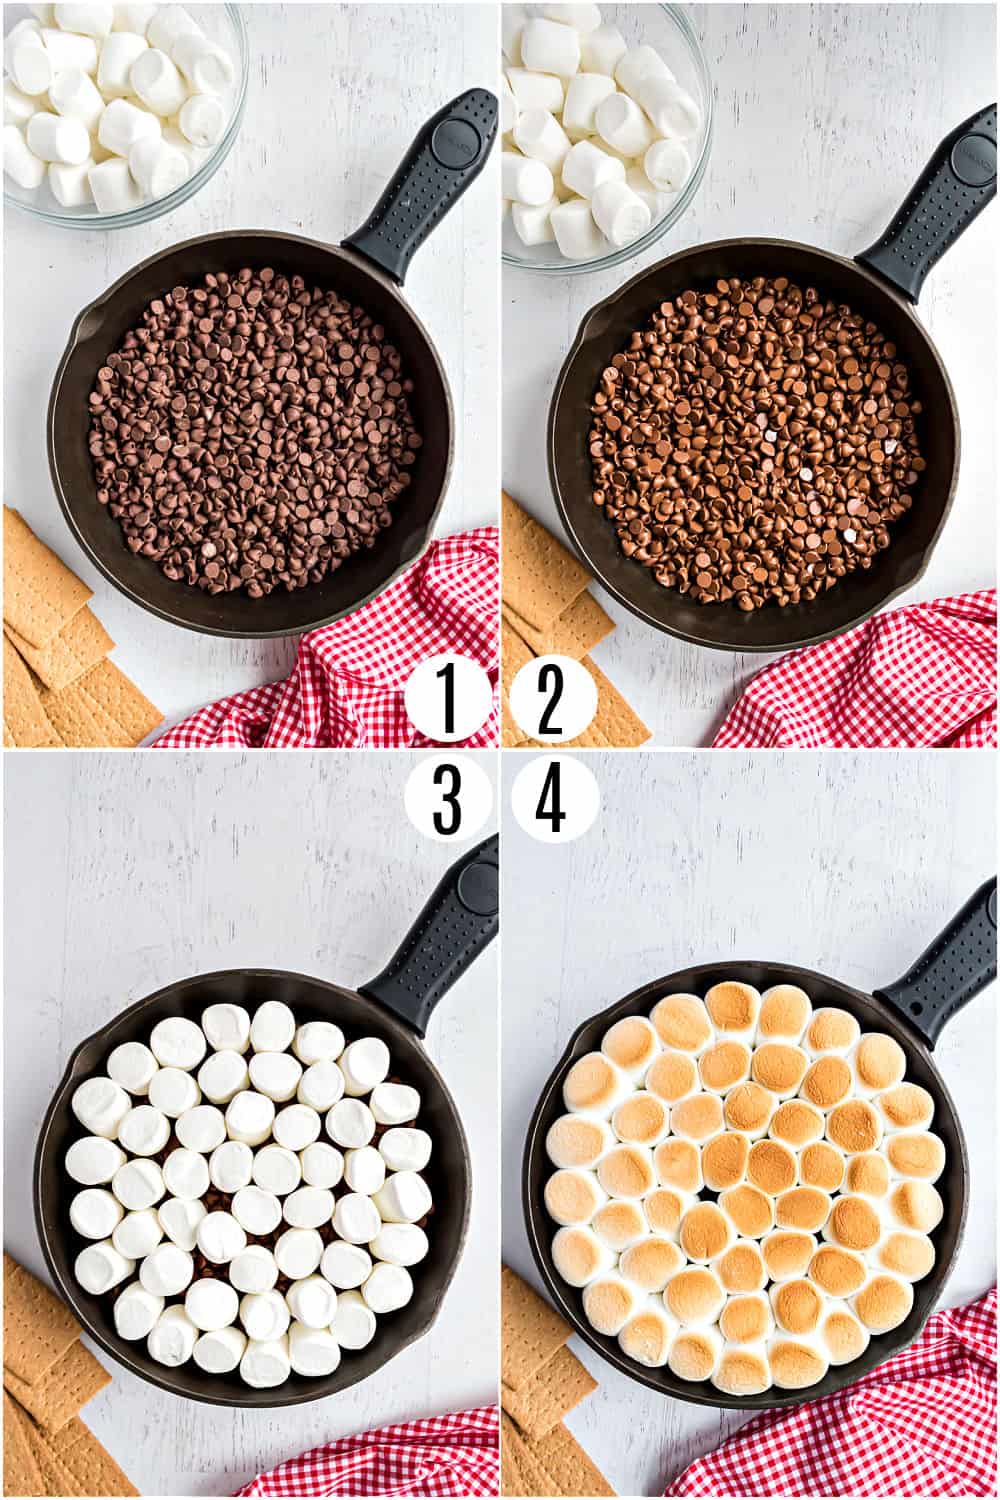 Step by step photos showing how to make smores dip.